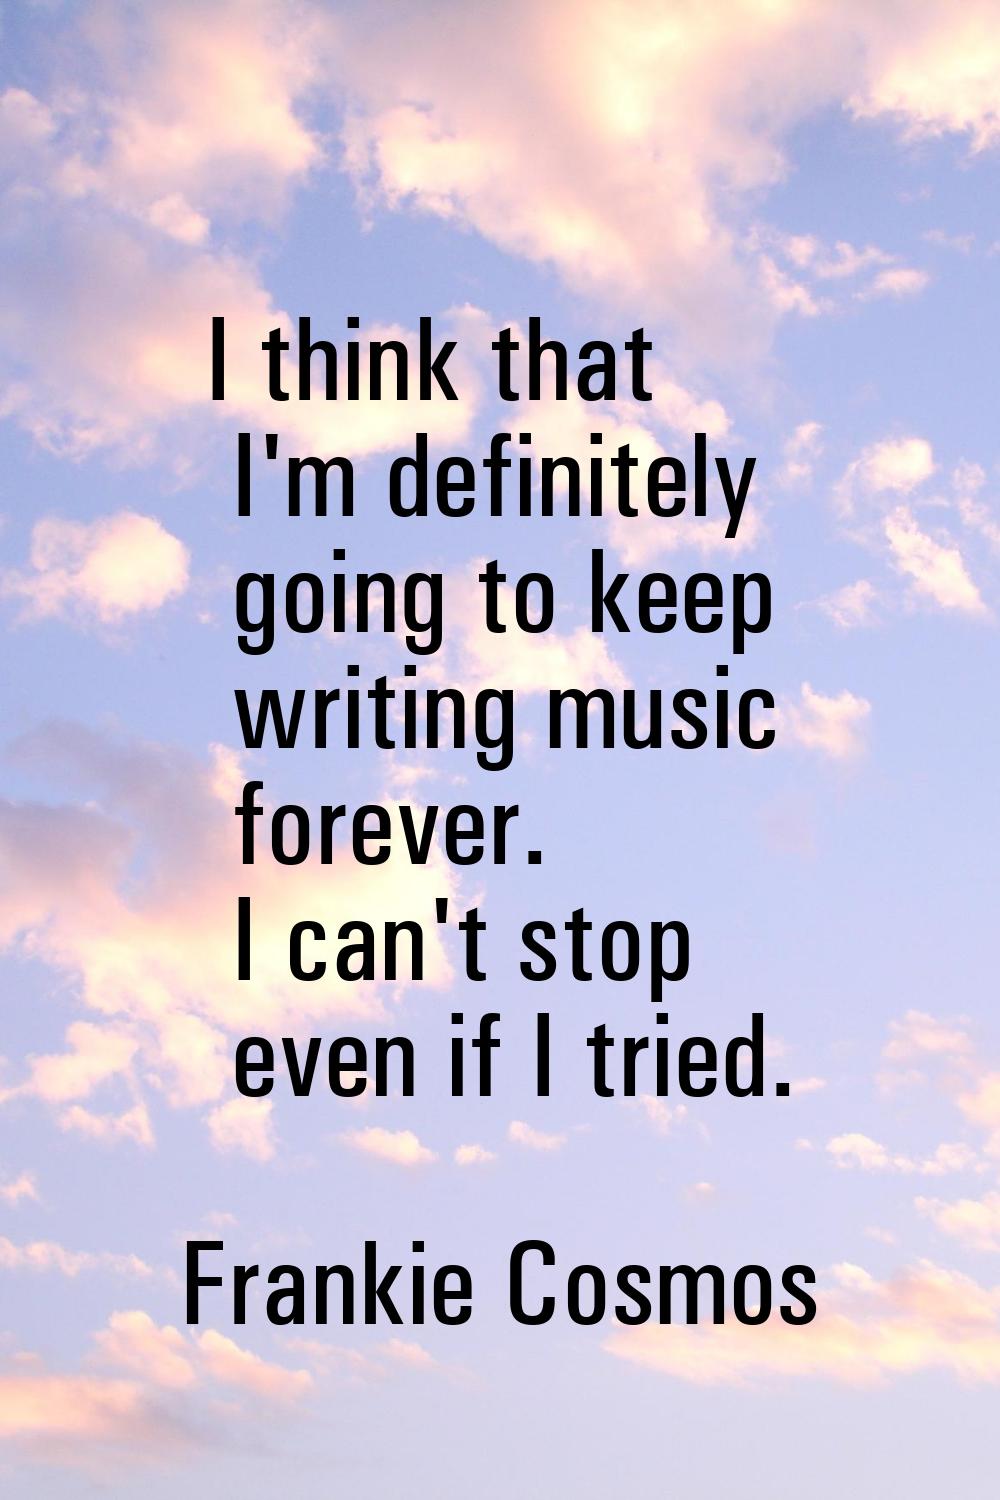 I think that I'm definitely going to keep writing music forever. I can't stop even if I tried.